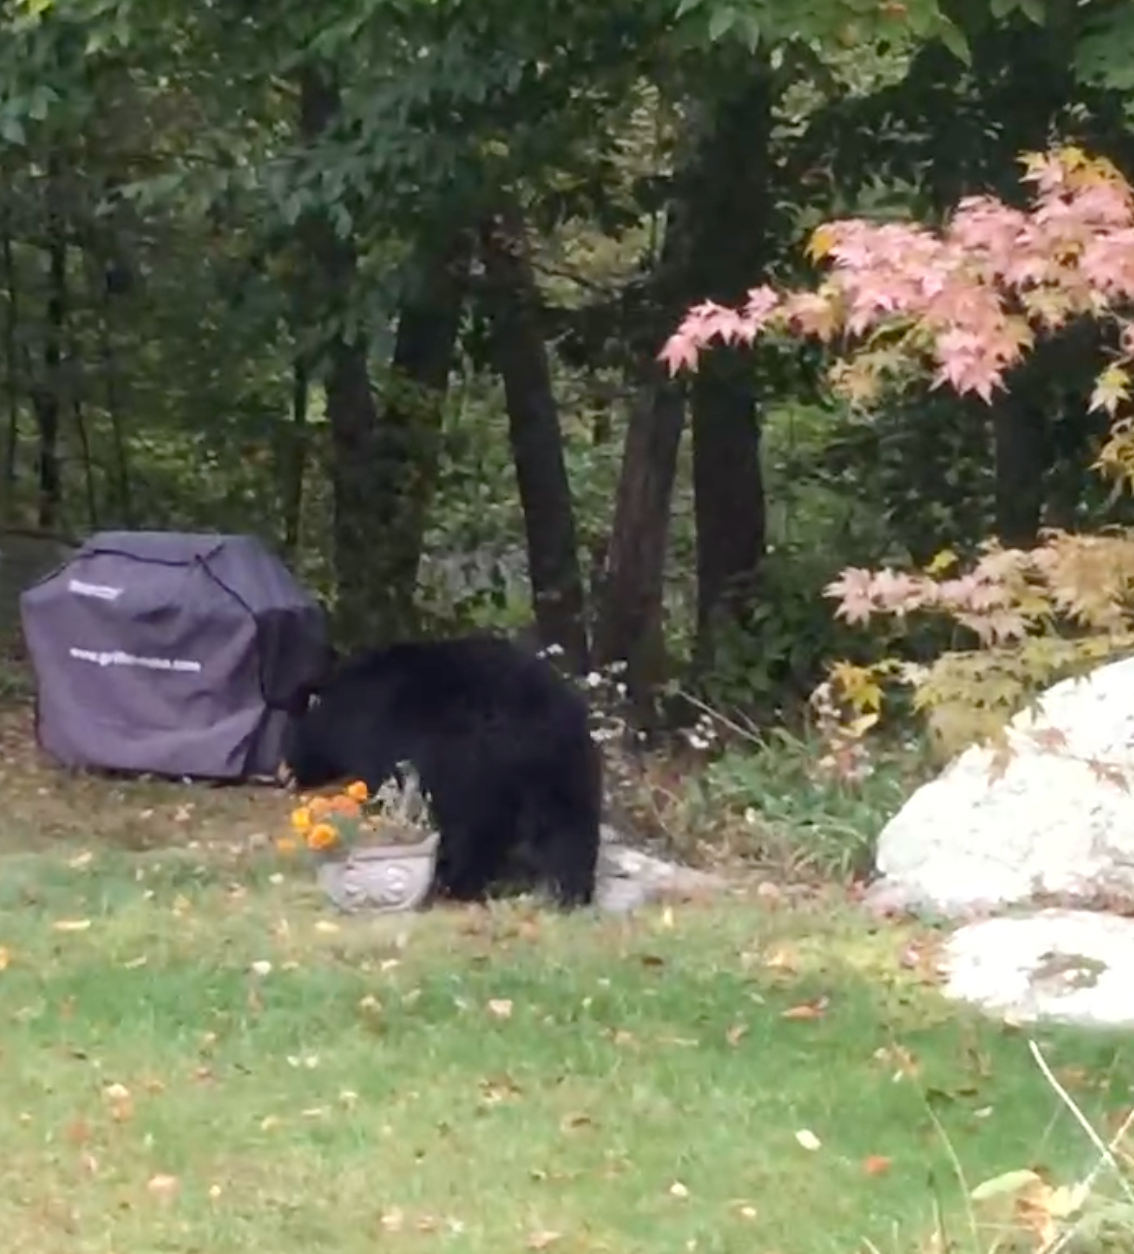 Bear wandering past a barbecue in Connecticut.